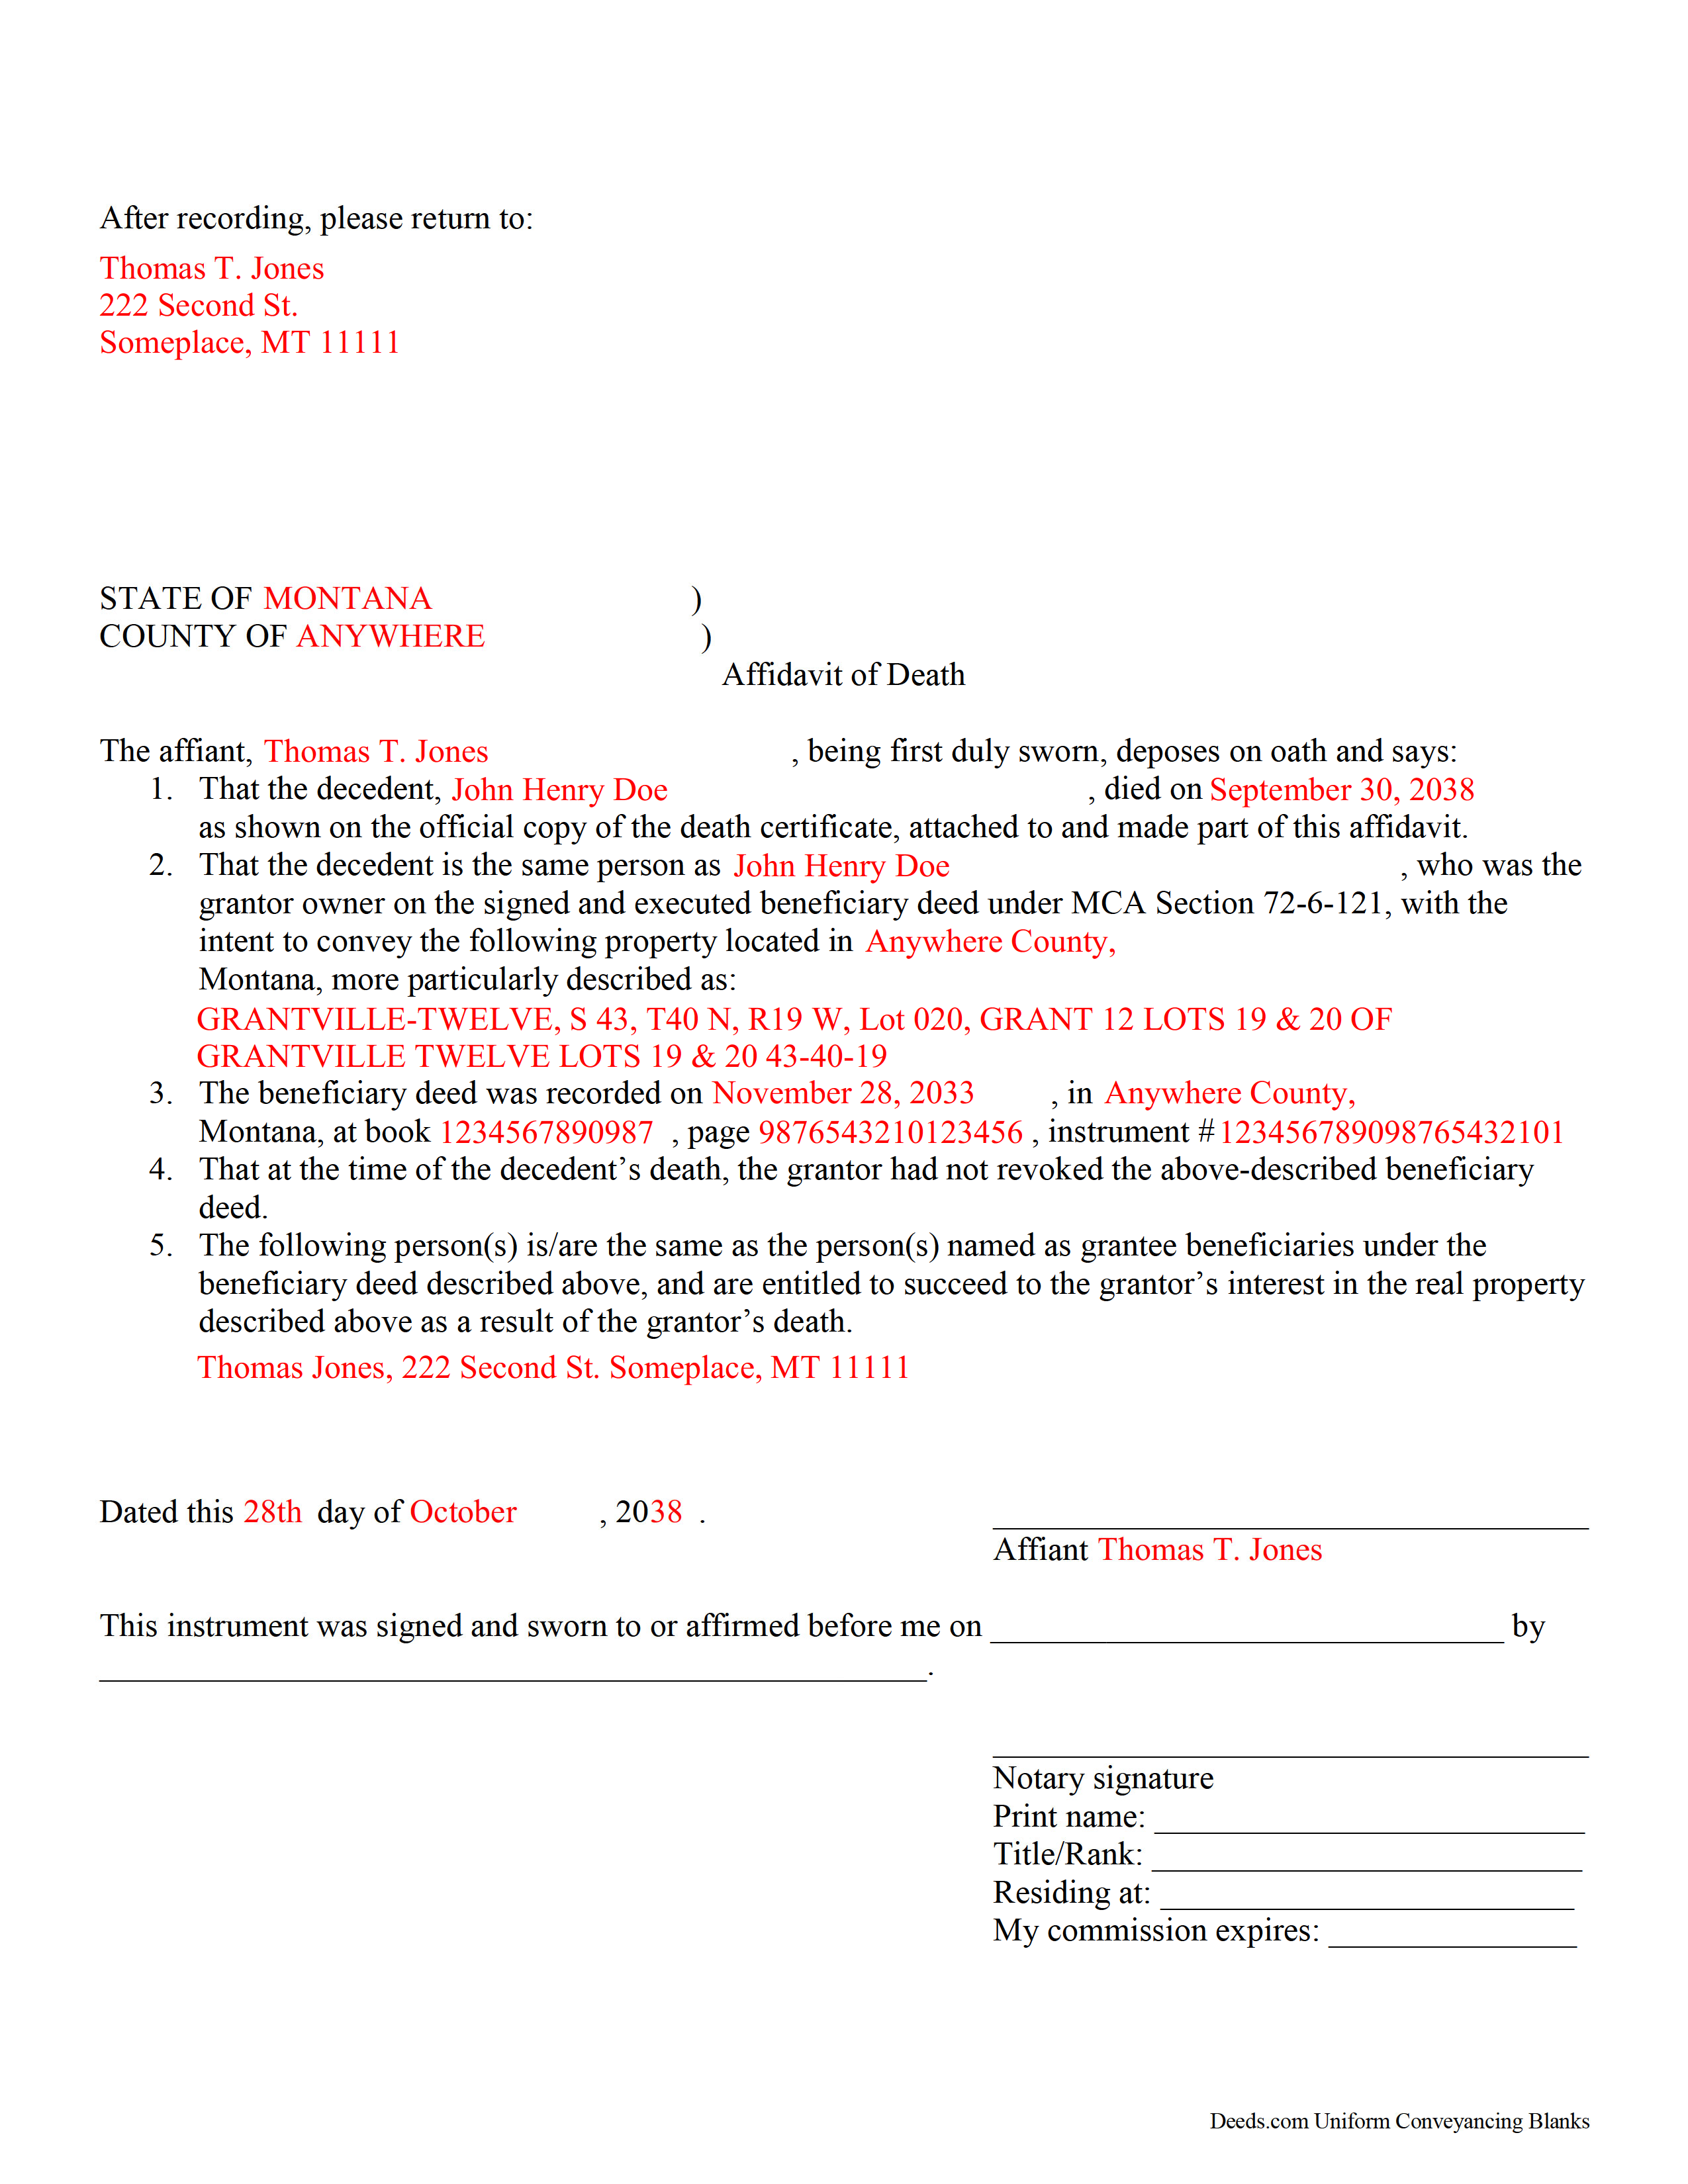 Completed Example of the Affidavit of Death Form